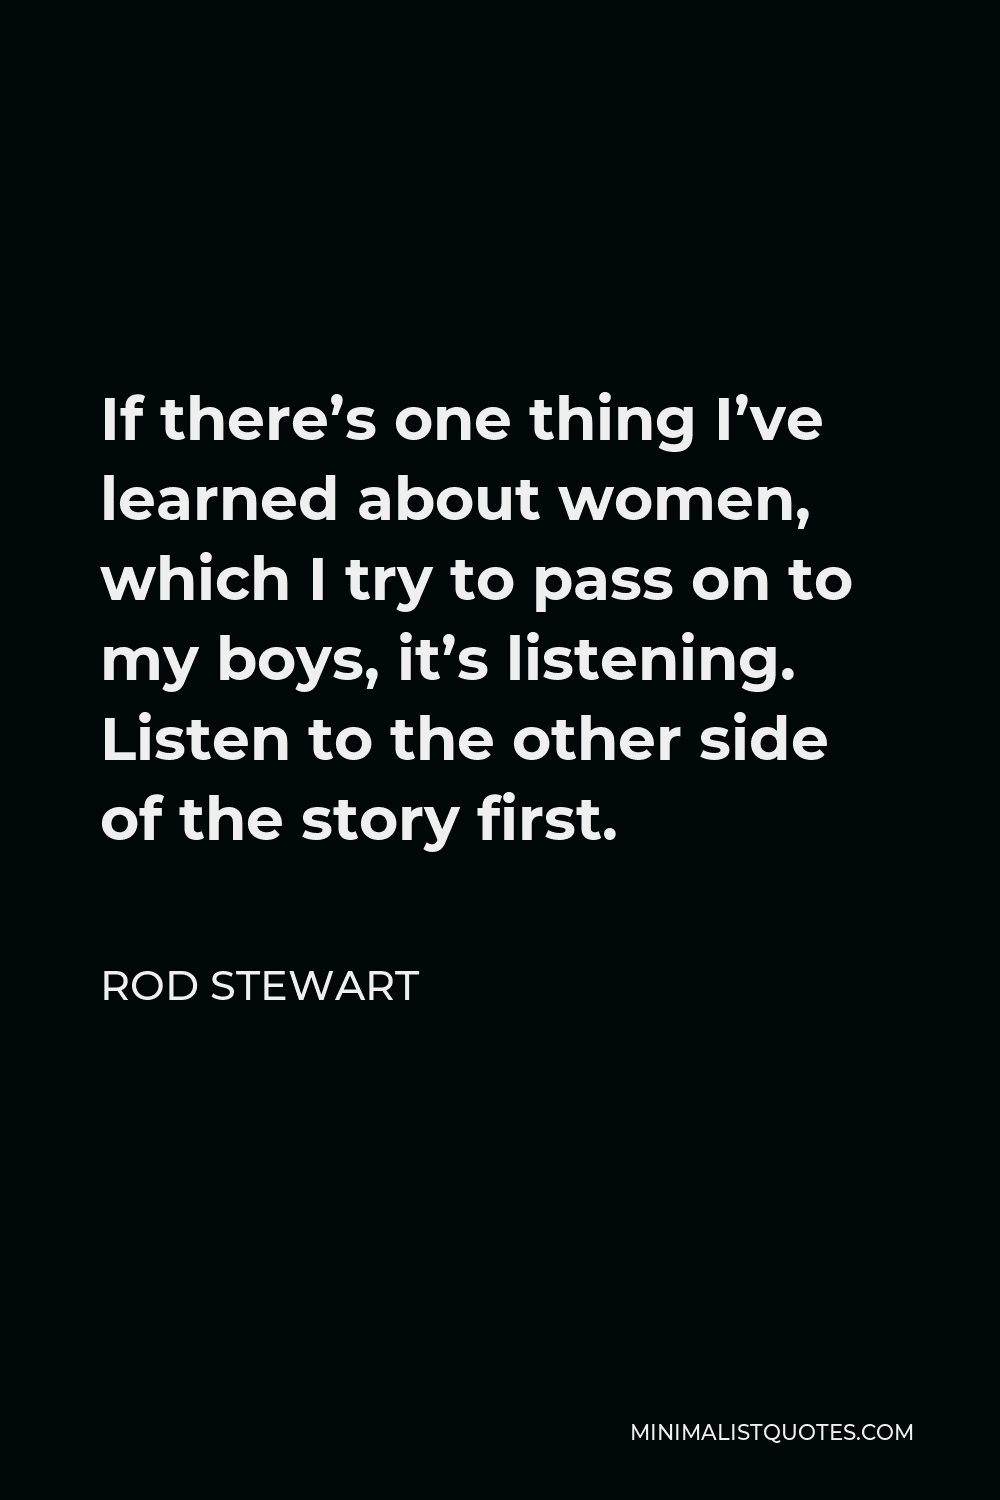 Rod Stewart Quote - If there’s one thing I’ve learned about women, which I try to pass on to my boys, it’s listening. Listen to the other side of the story first.